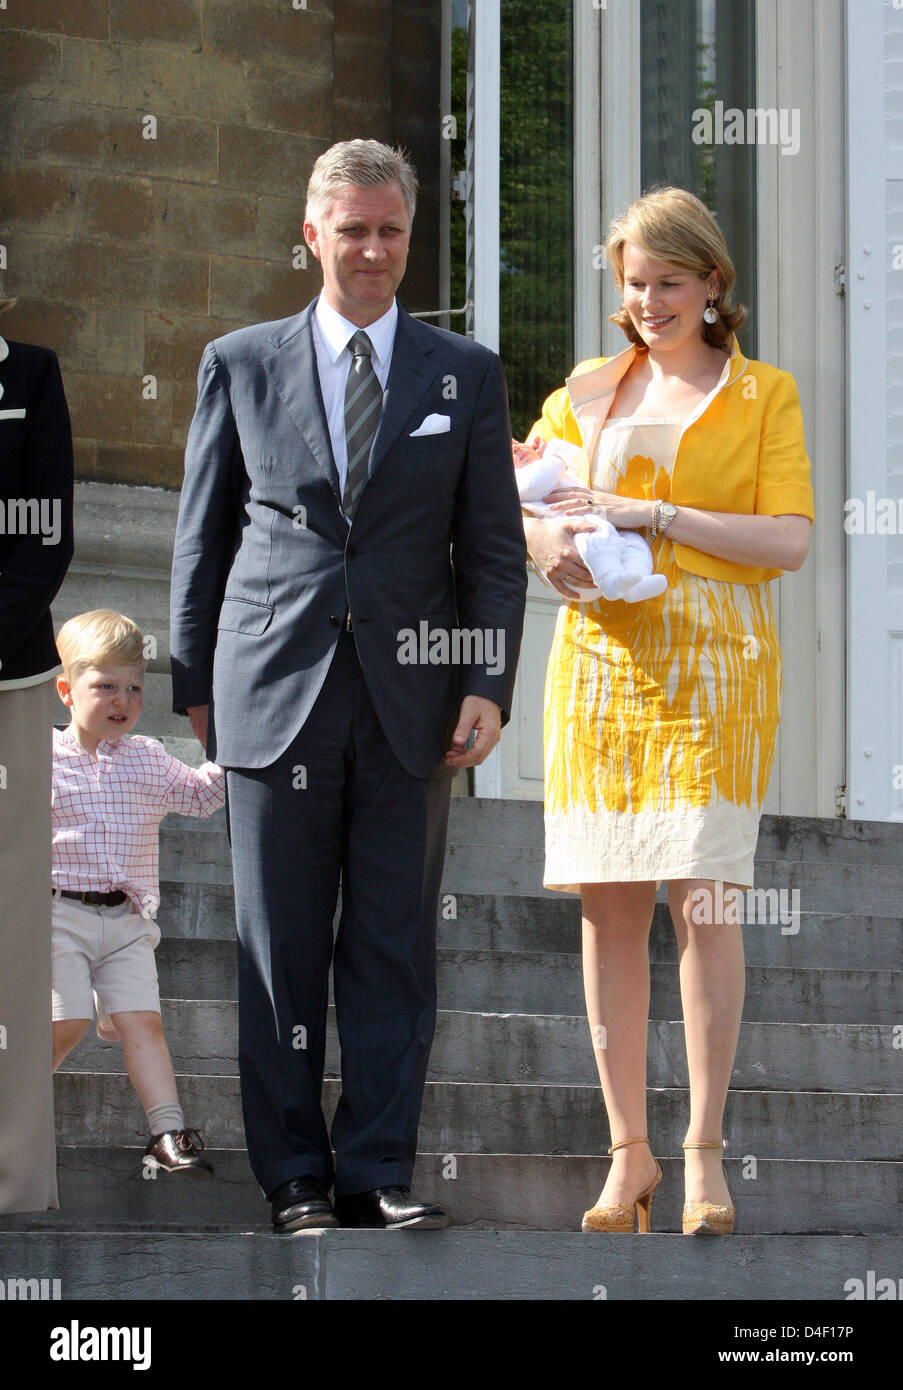 Princess Mathilde, who holds her daughter Princess Eleonore, Prince Philippe and their son Emmanuel of Belgium are pictured during the celebration of Queen Fabiola's 80th birthday at Laeken Castle in Brussels, Belgium, 03 June 2008. Photo: Albert Nieboer (NETHERLANDS OUT) Stock Photo